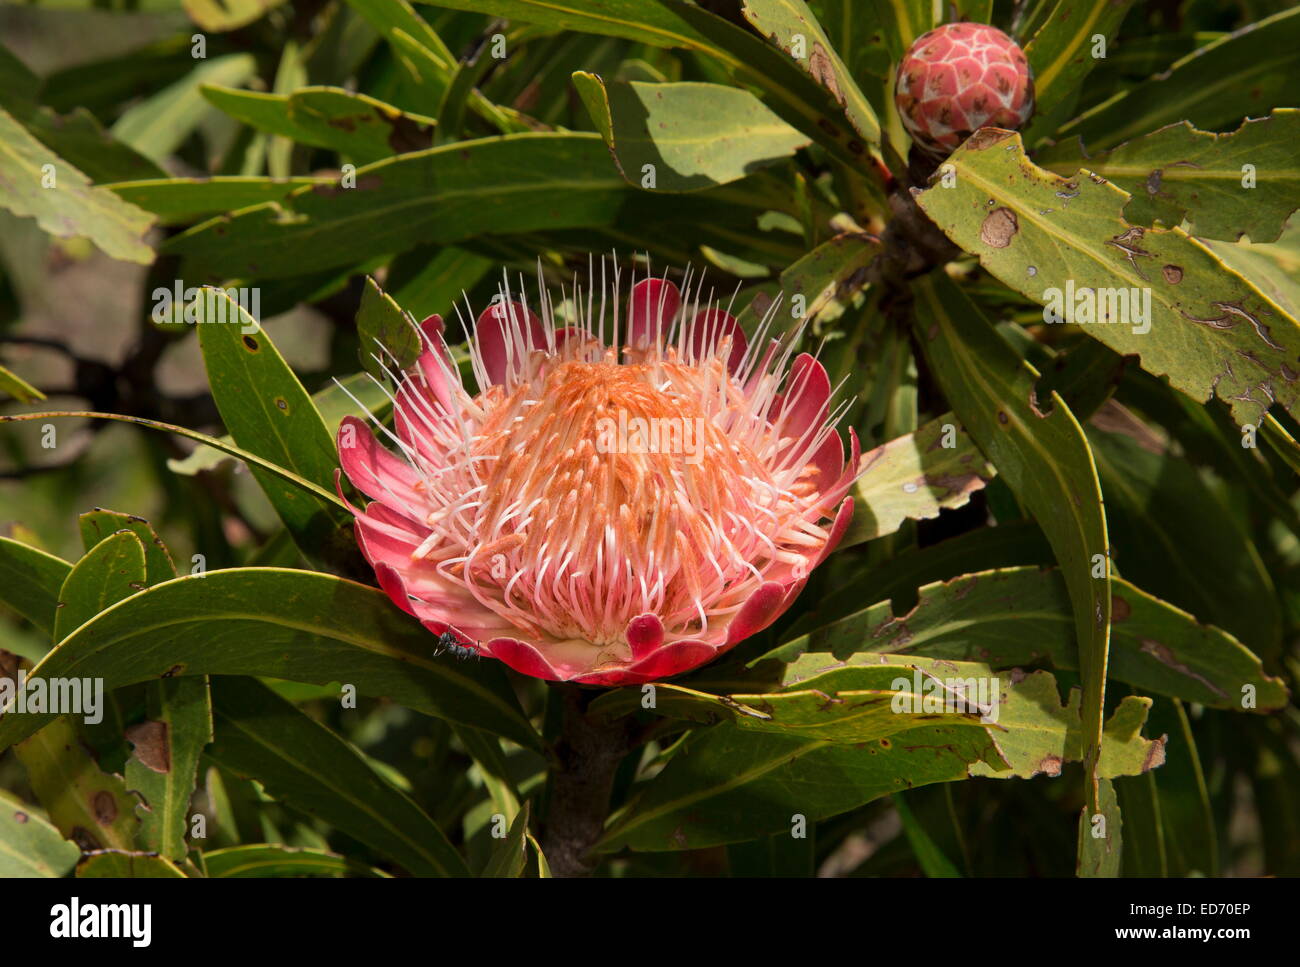 Common Sugar bush, Protea caffra  in flower; South Africa Stock Photo